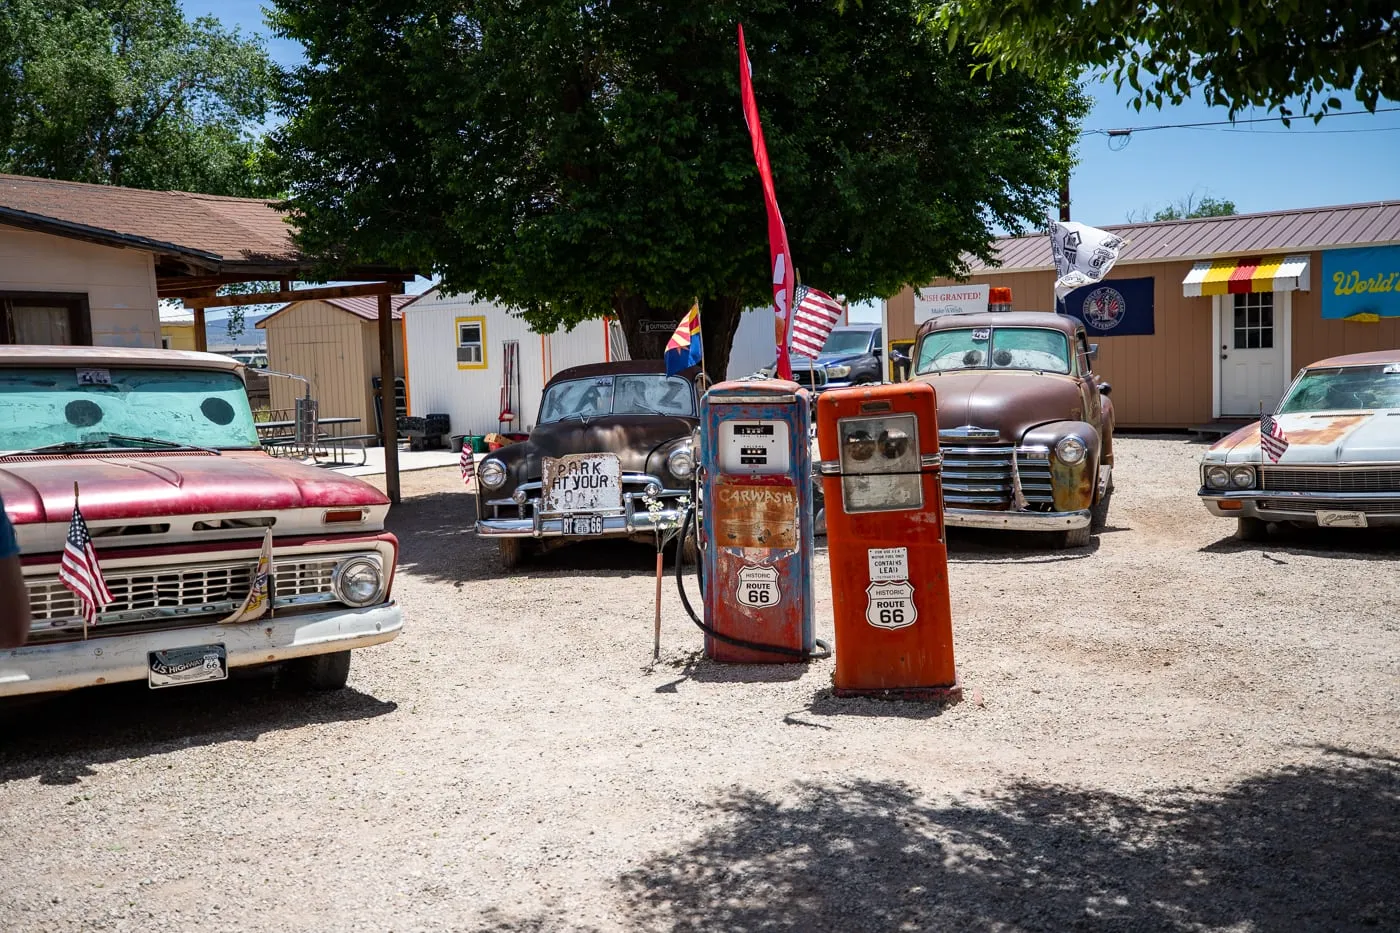 Old fuel pumps and cars at Delgadillo’s Snow Cap in Seligman, Arizona - Route 66 restaurant and Drive-In Diner